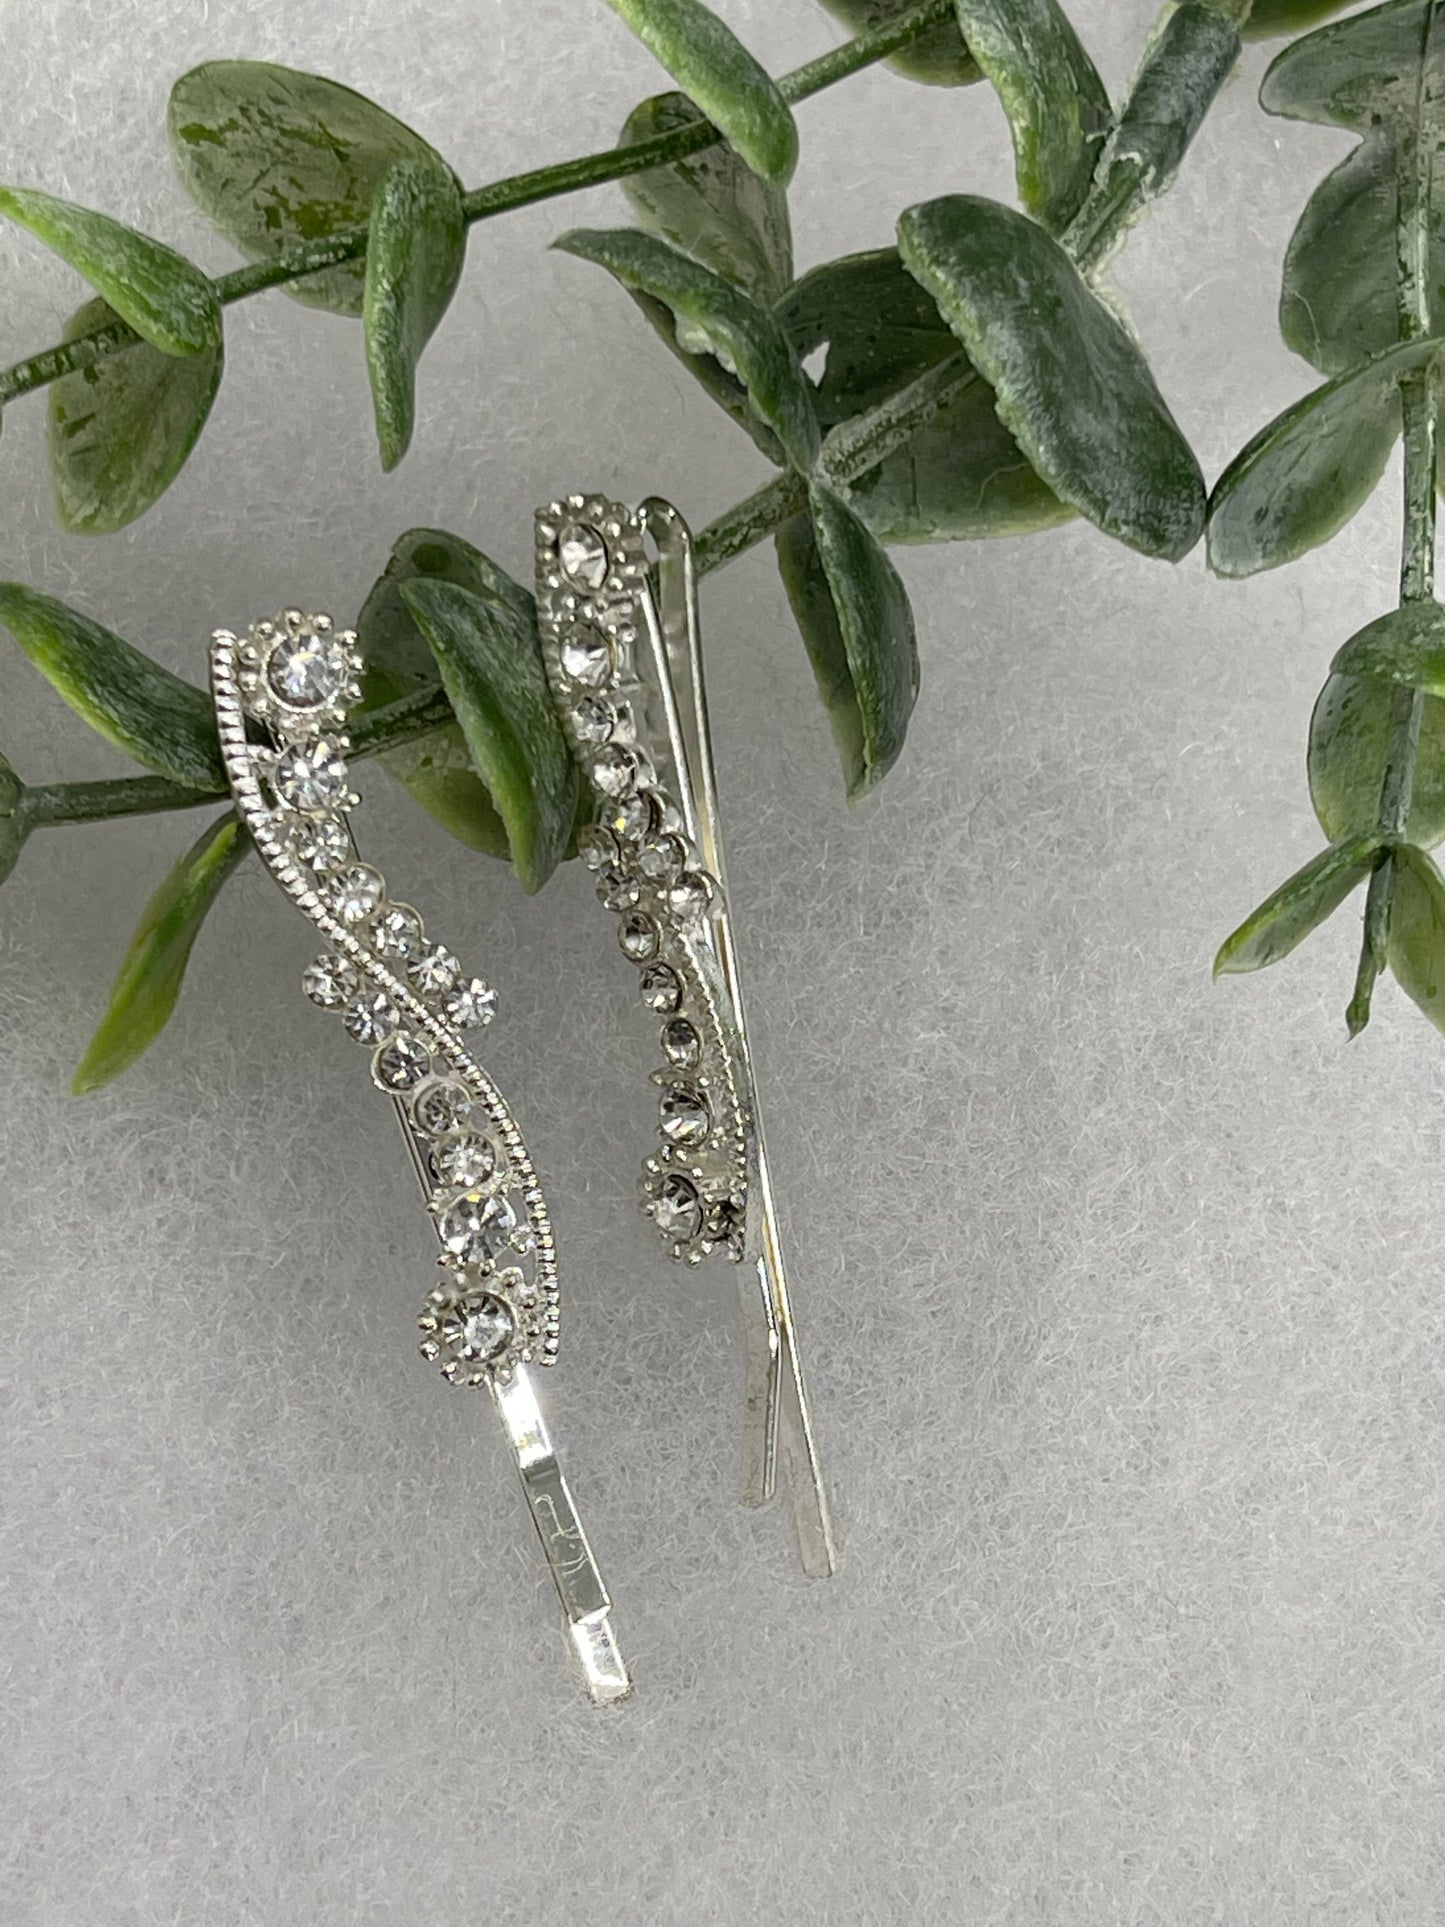 Clear crystal rhinestone approximately 2.0” silver tone hair pins 2 pc set wedding bridal shower engagement formal princess accessory accessories